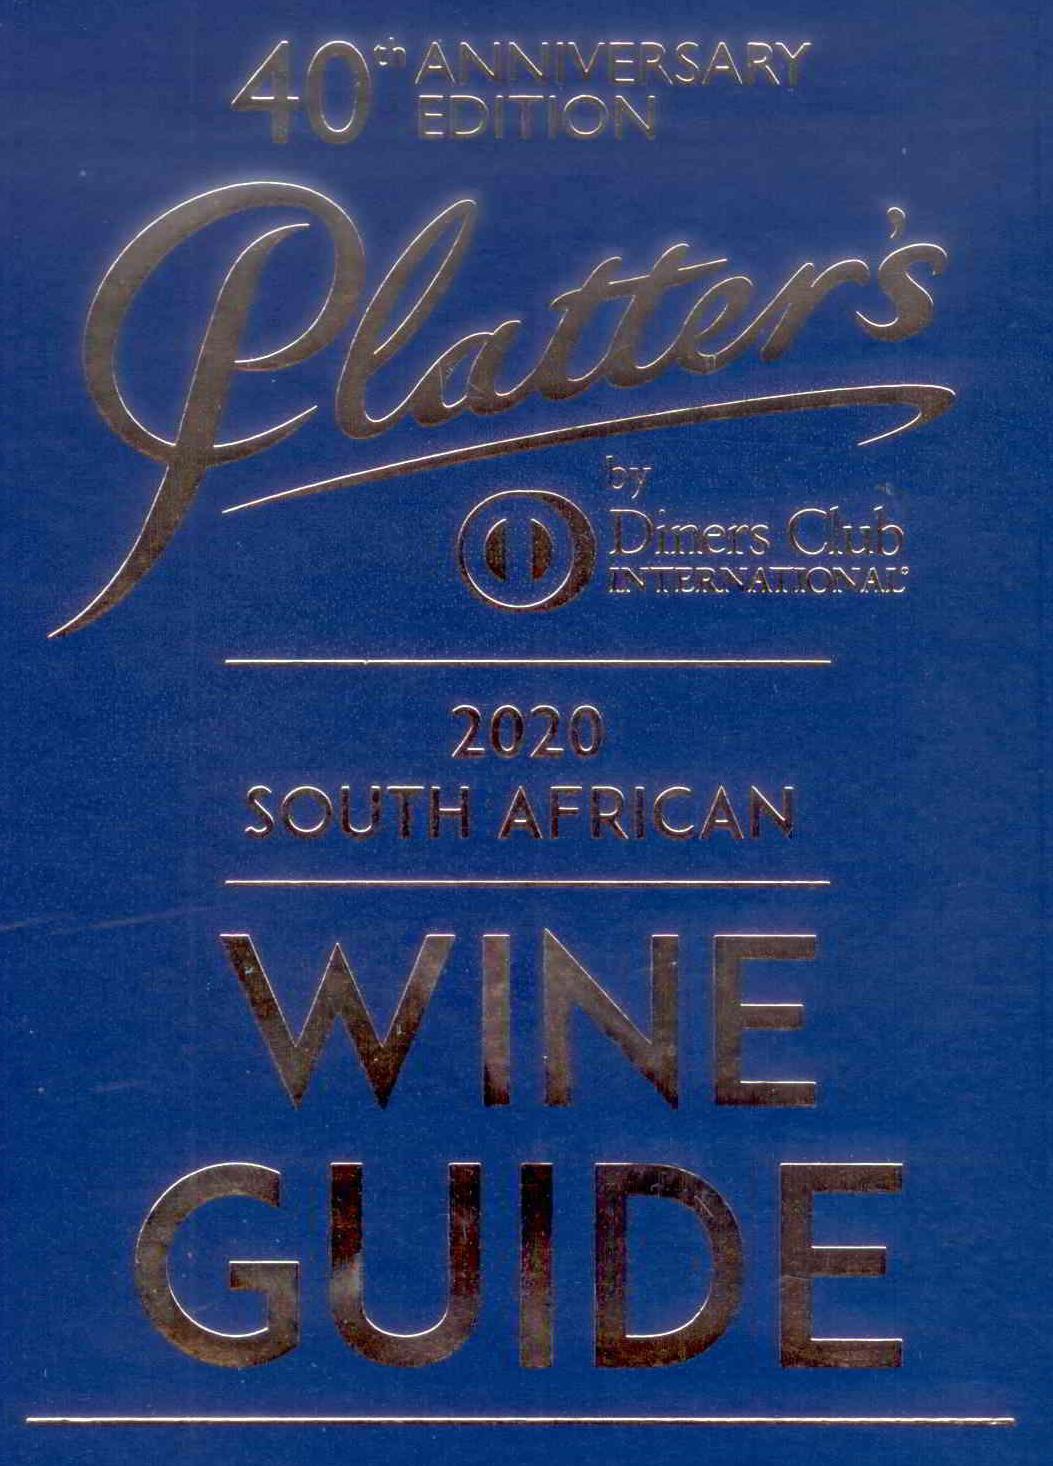 Percy Tours in Hermanus is listed in the John Platter wine book of South Africa